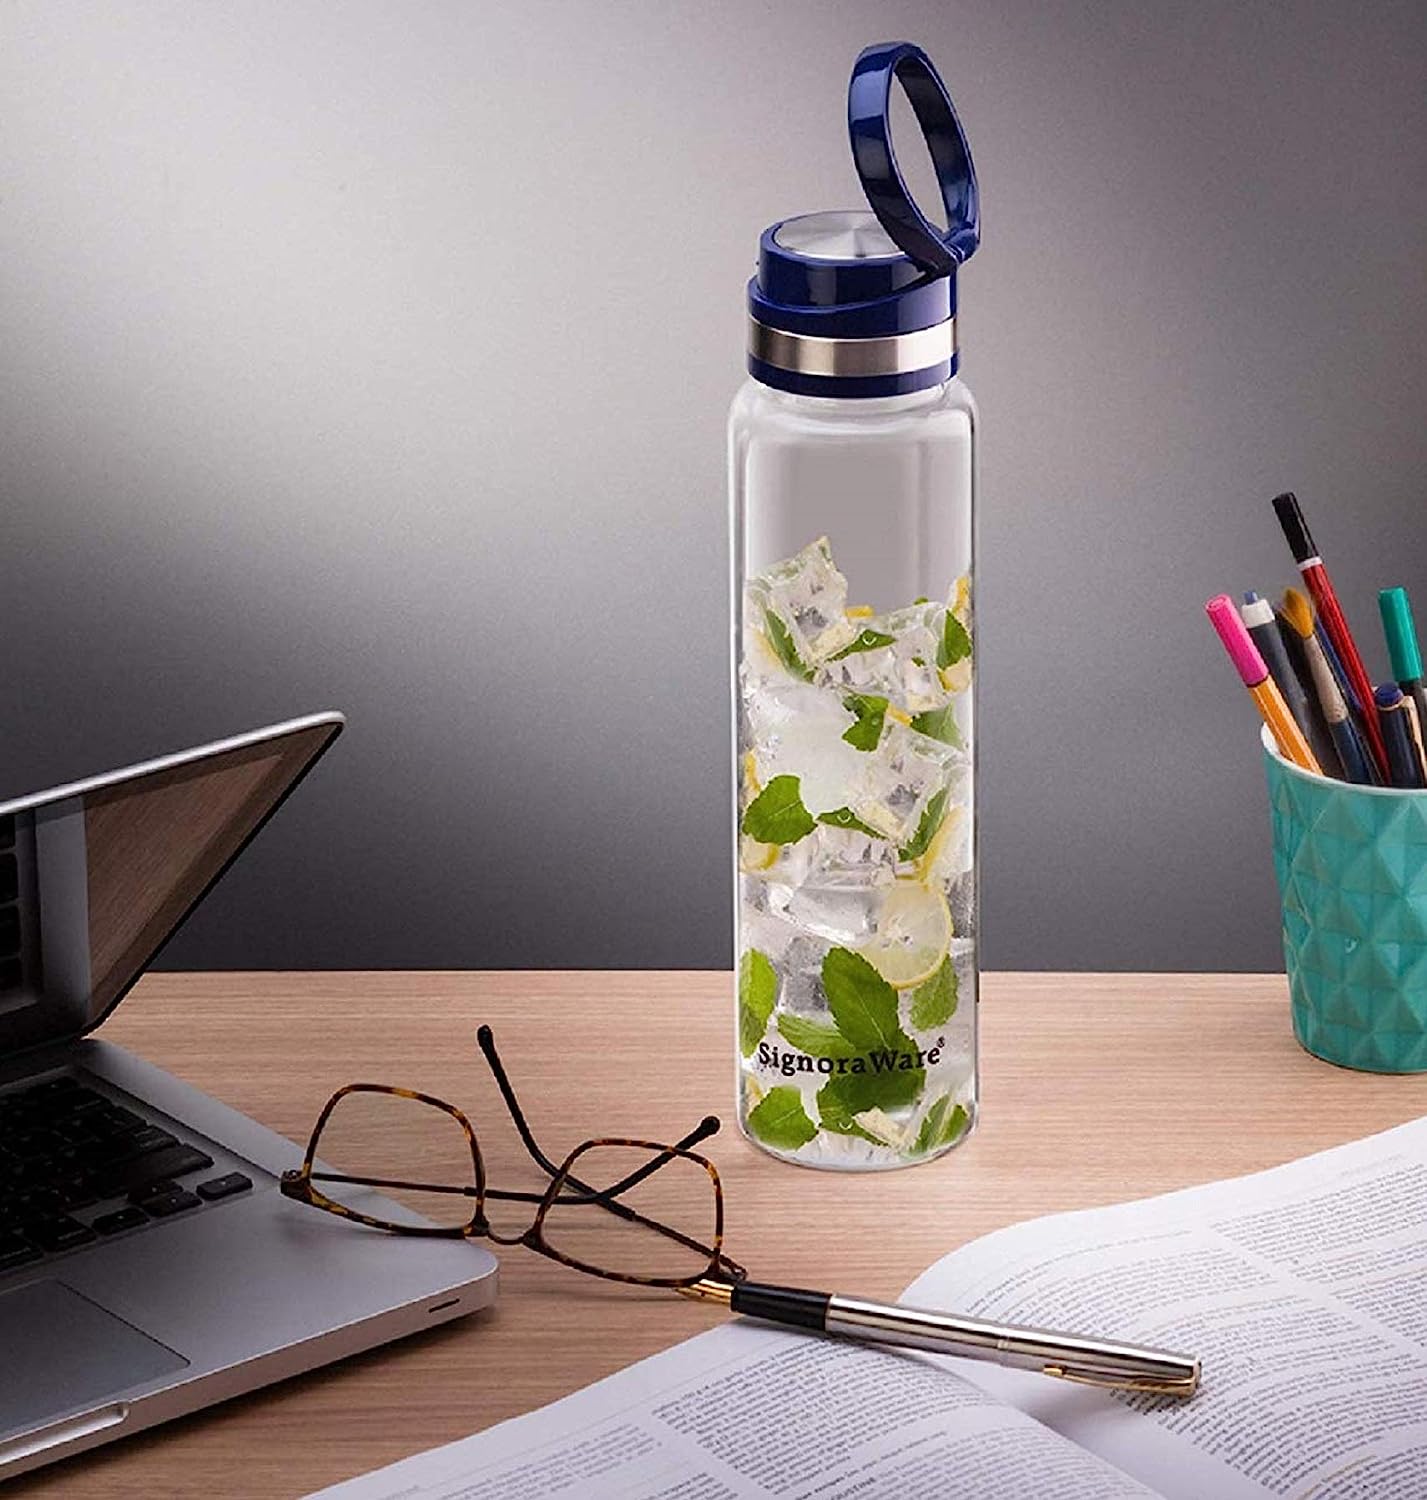 SignoraWare Starlite Borosilicate Light Weight Glass Water Bottle with Screw Cap (With Holding Ring) | Leak Proof Transparent (1 Ltr, Set of 1, Clear) - Premium Glass Bottle from Signoraware - Just Rs. 399! Shop now at Surana Sons